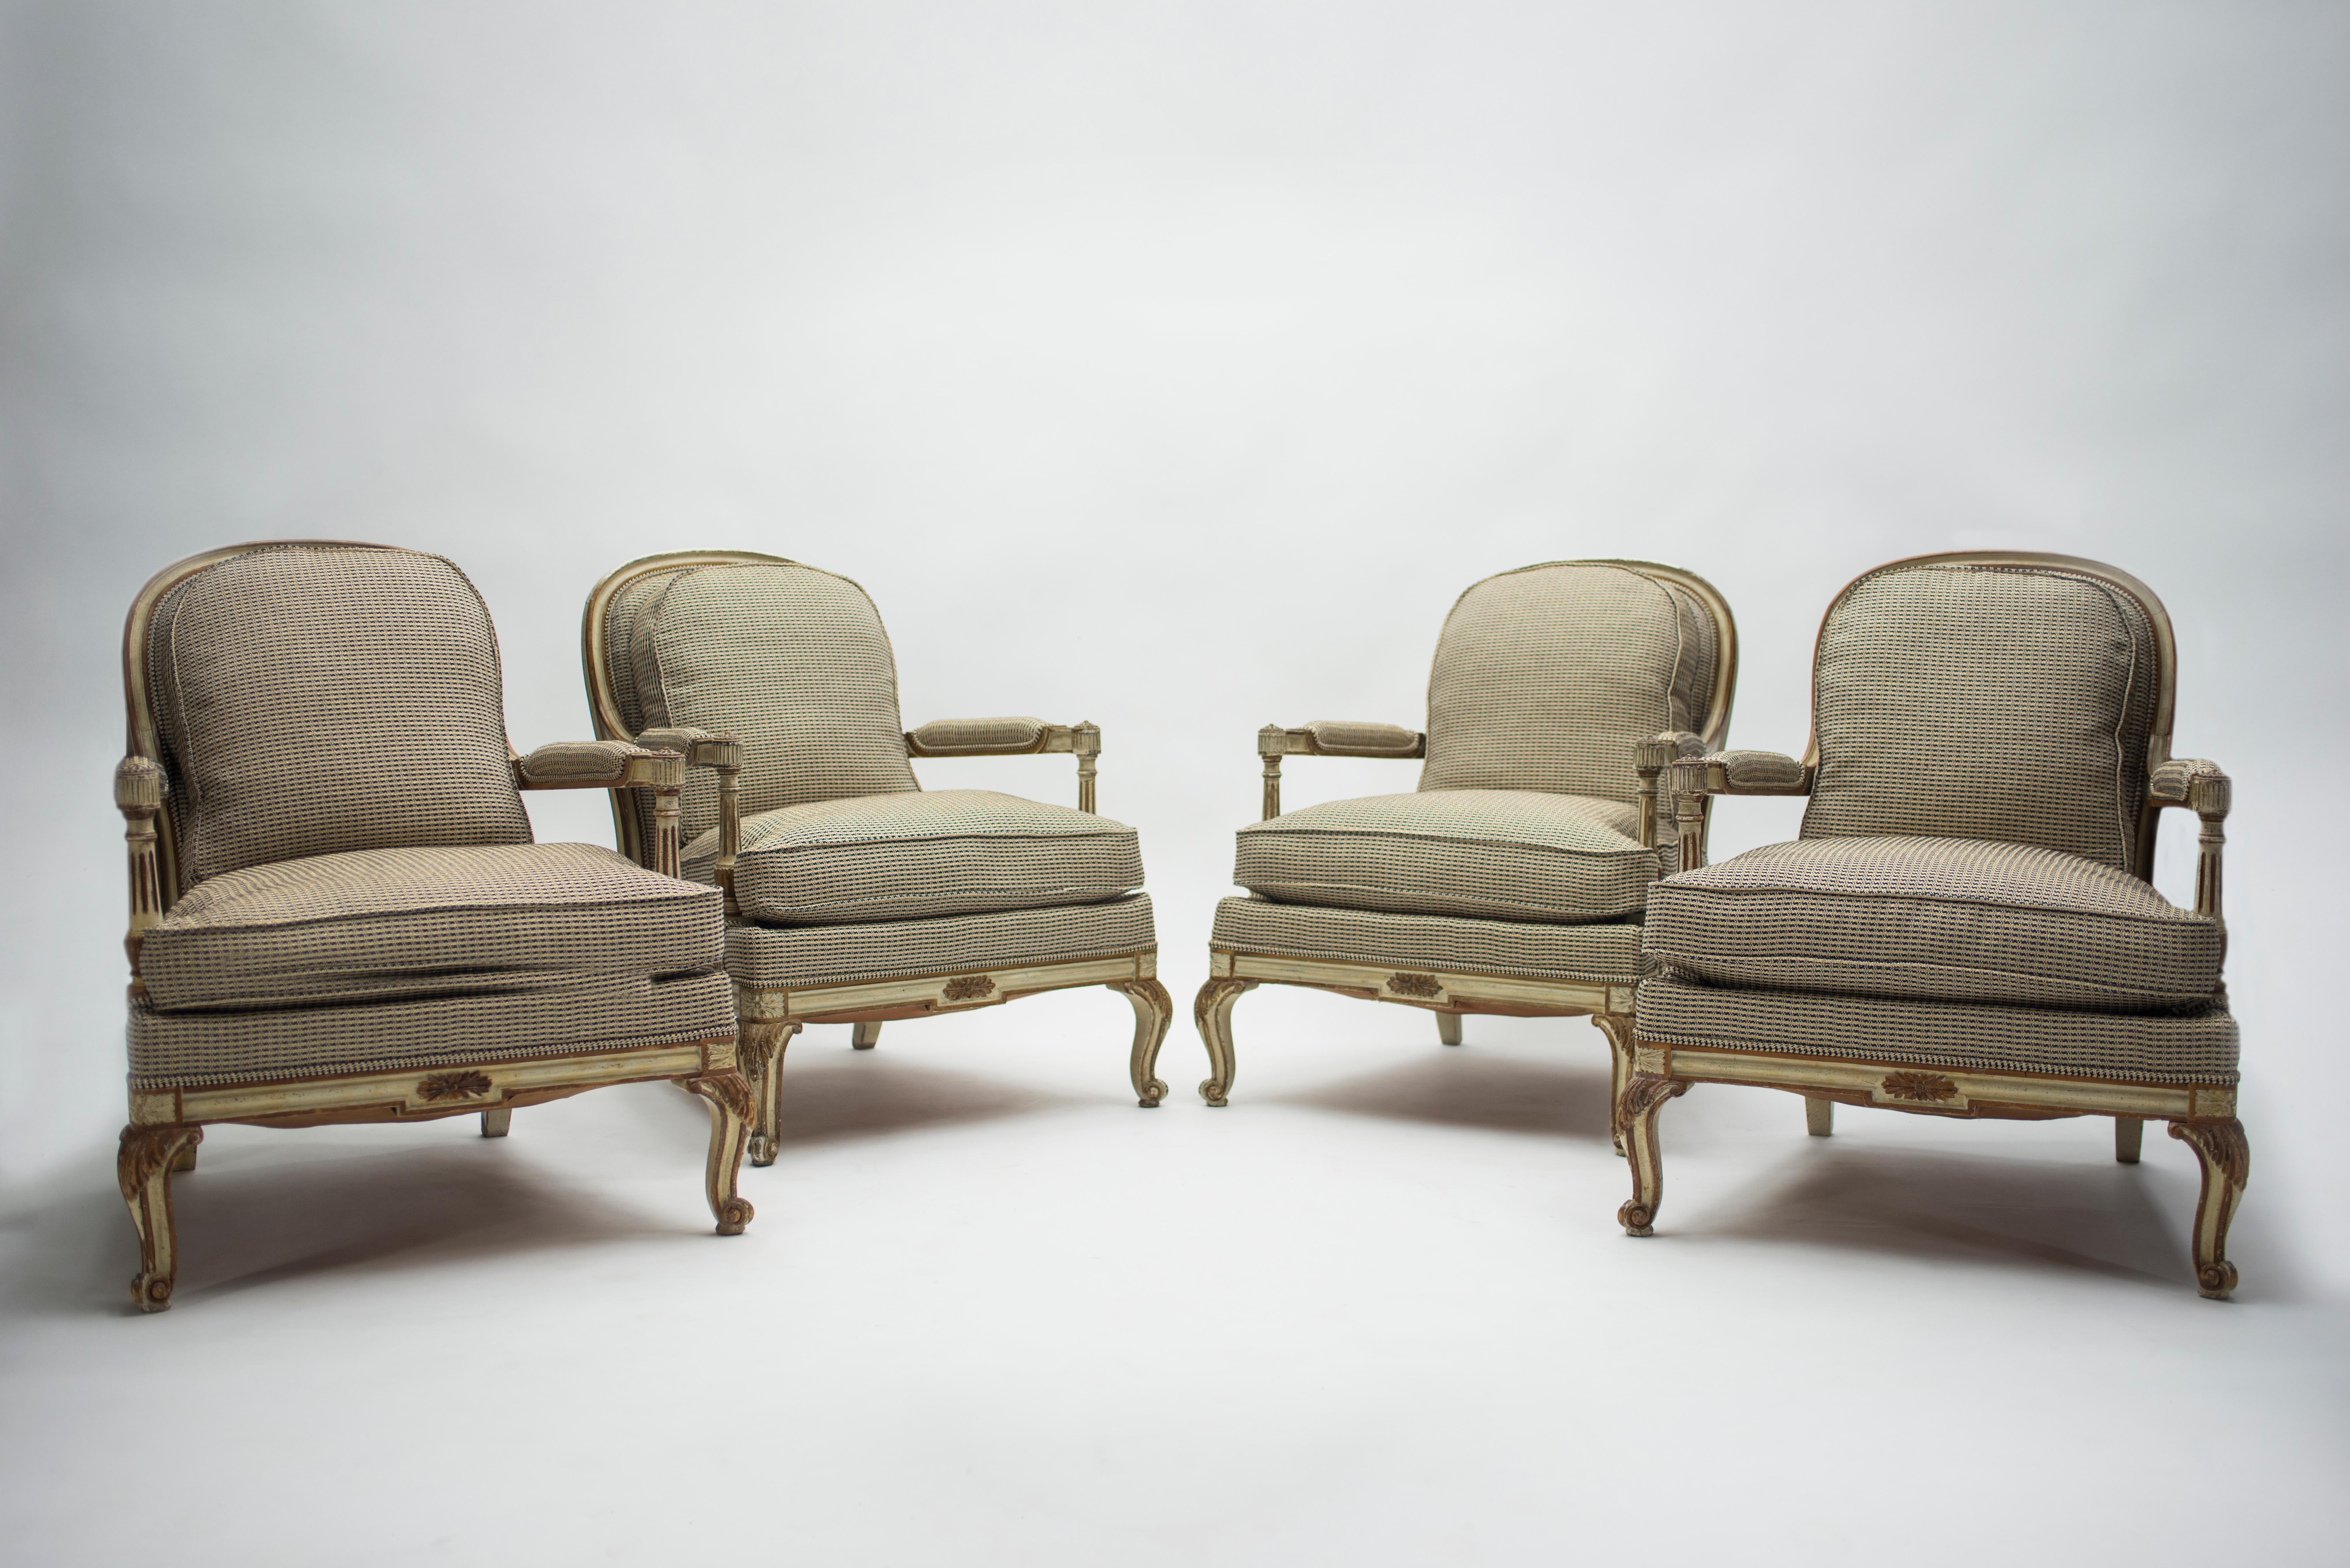 French Rare Neoclassical Set of 4 Armchairs Signed by Maurice Hirsch, 1970s